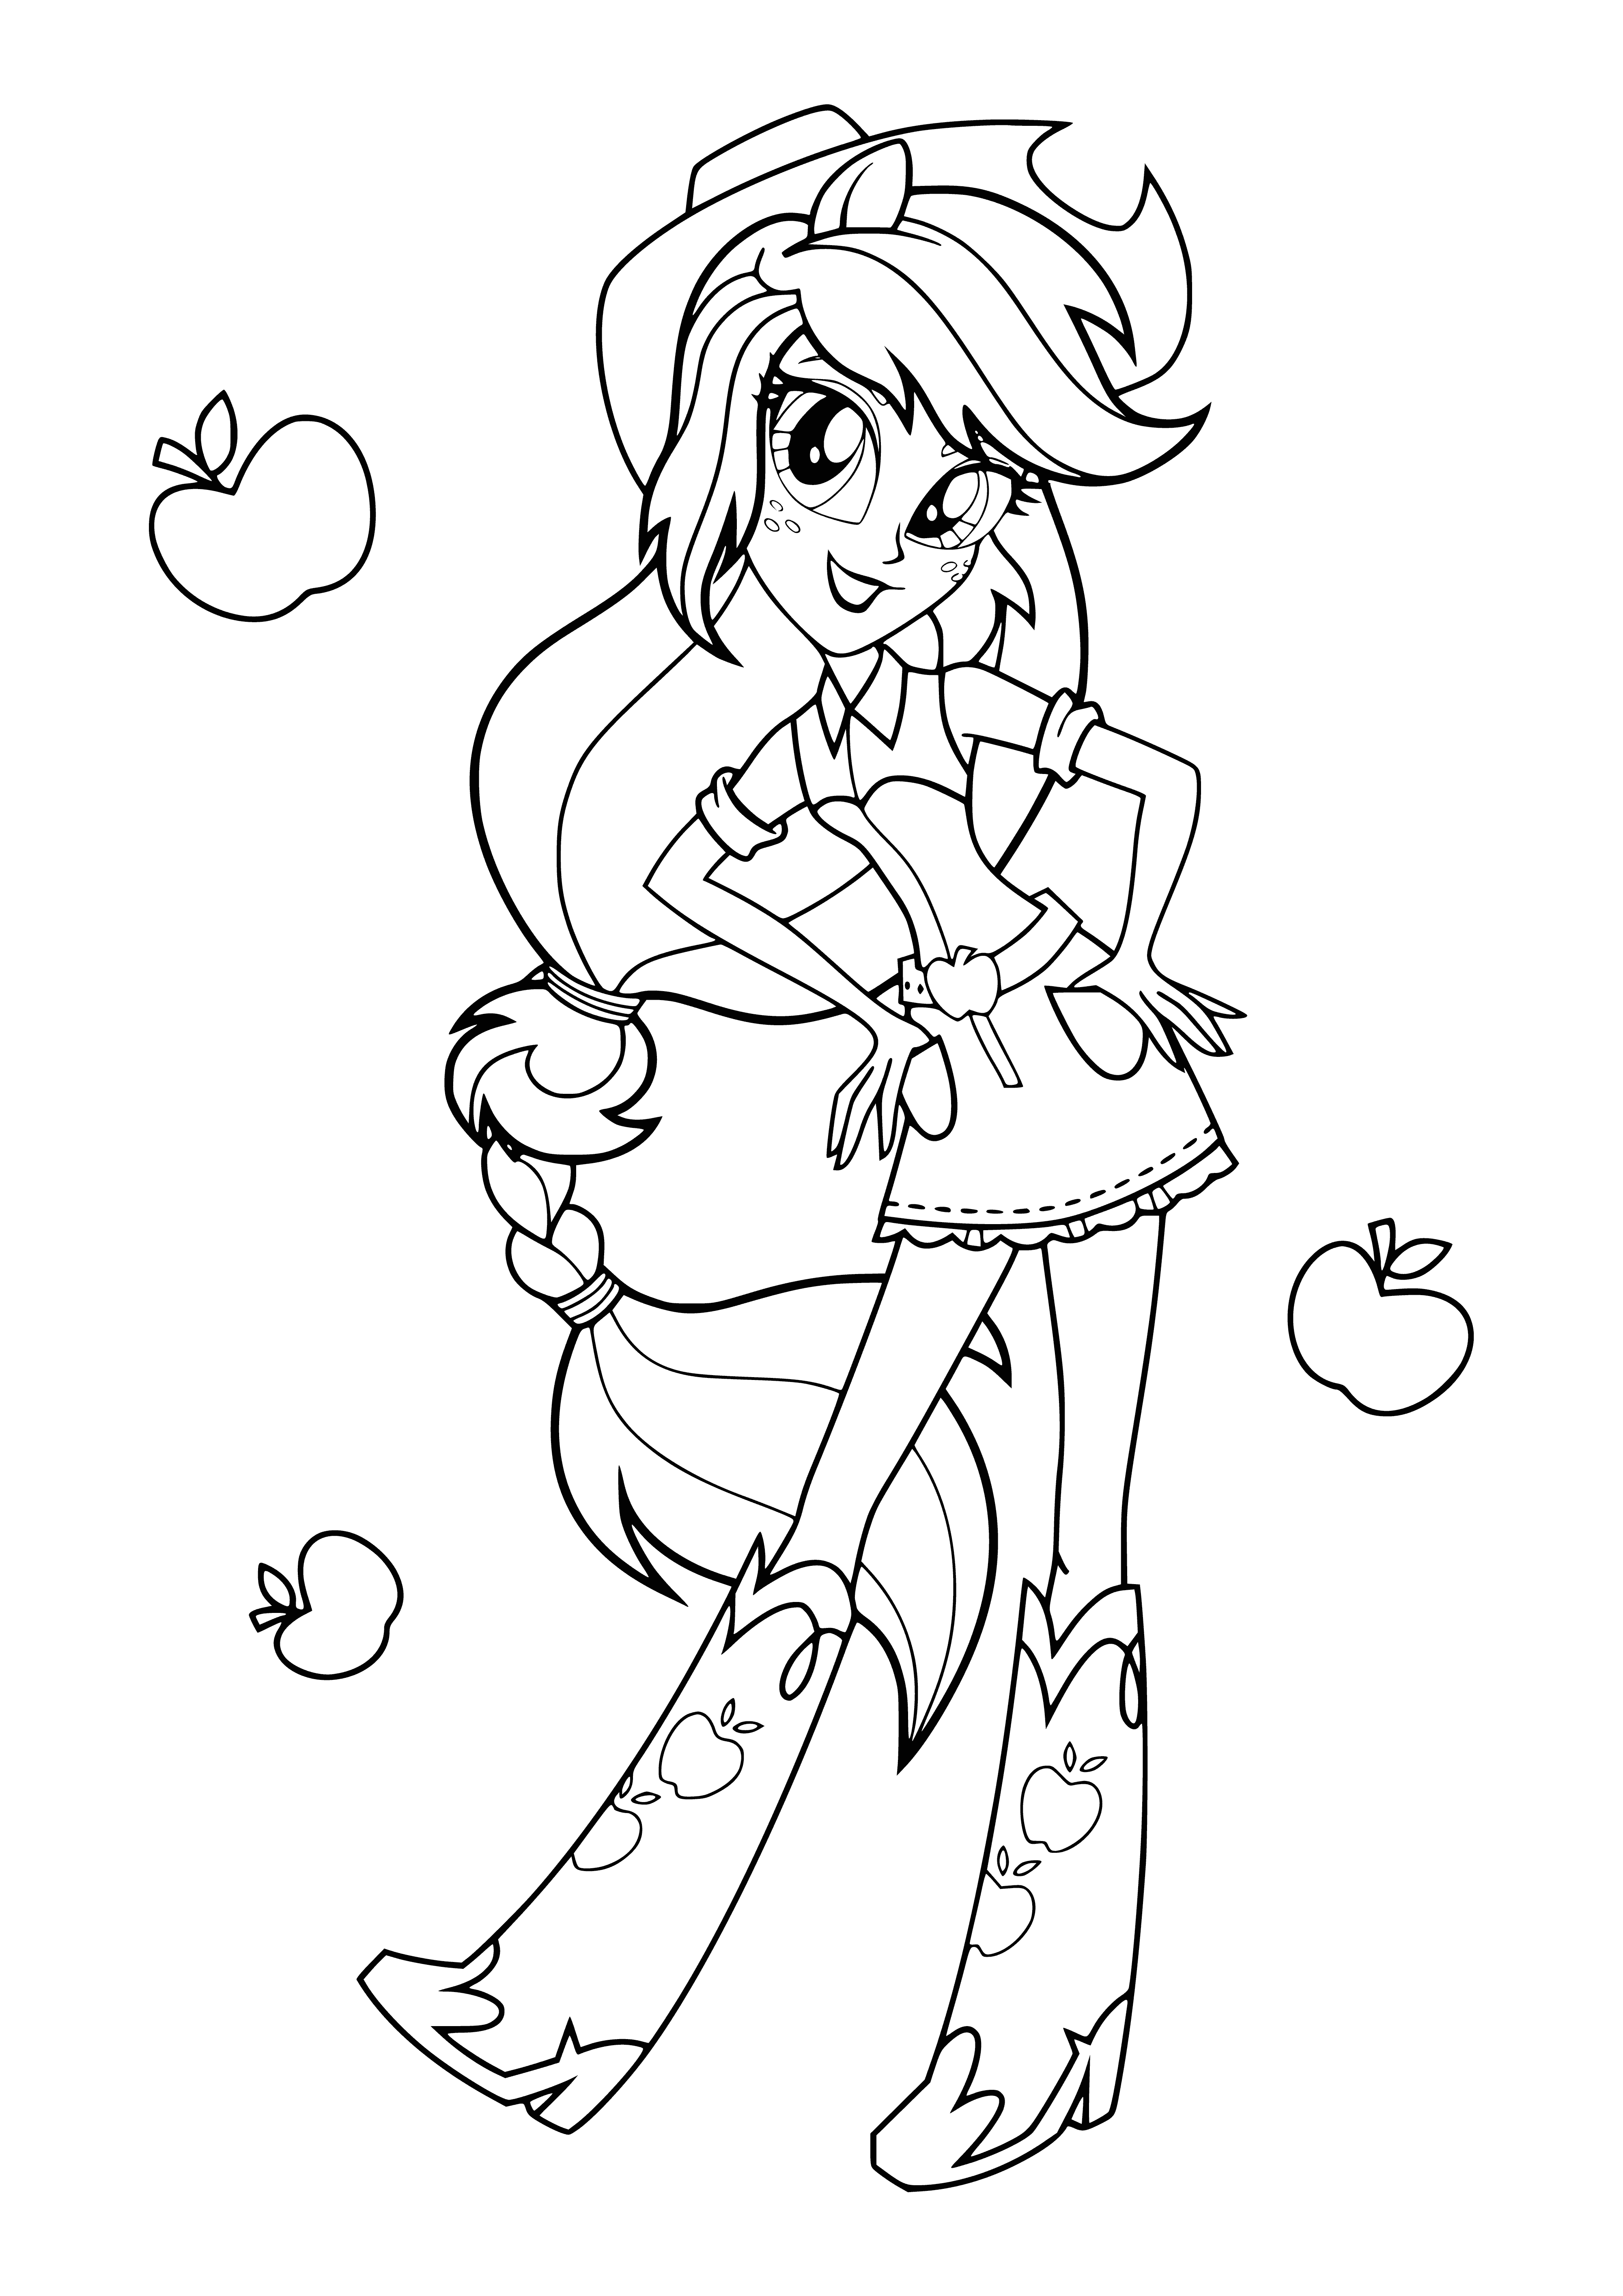 coloring page: Applejack is a teen w/ blonde ponytail wearing brown vest & white shirt holding a green apple. #cartooncharacter